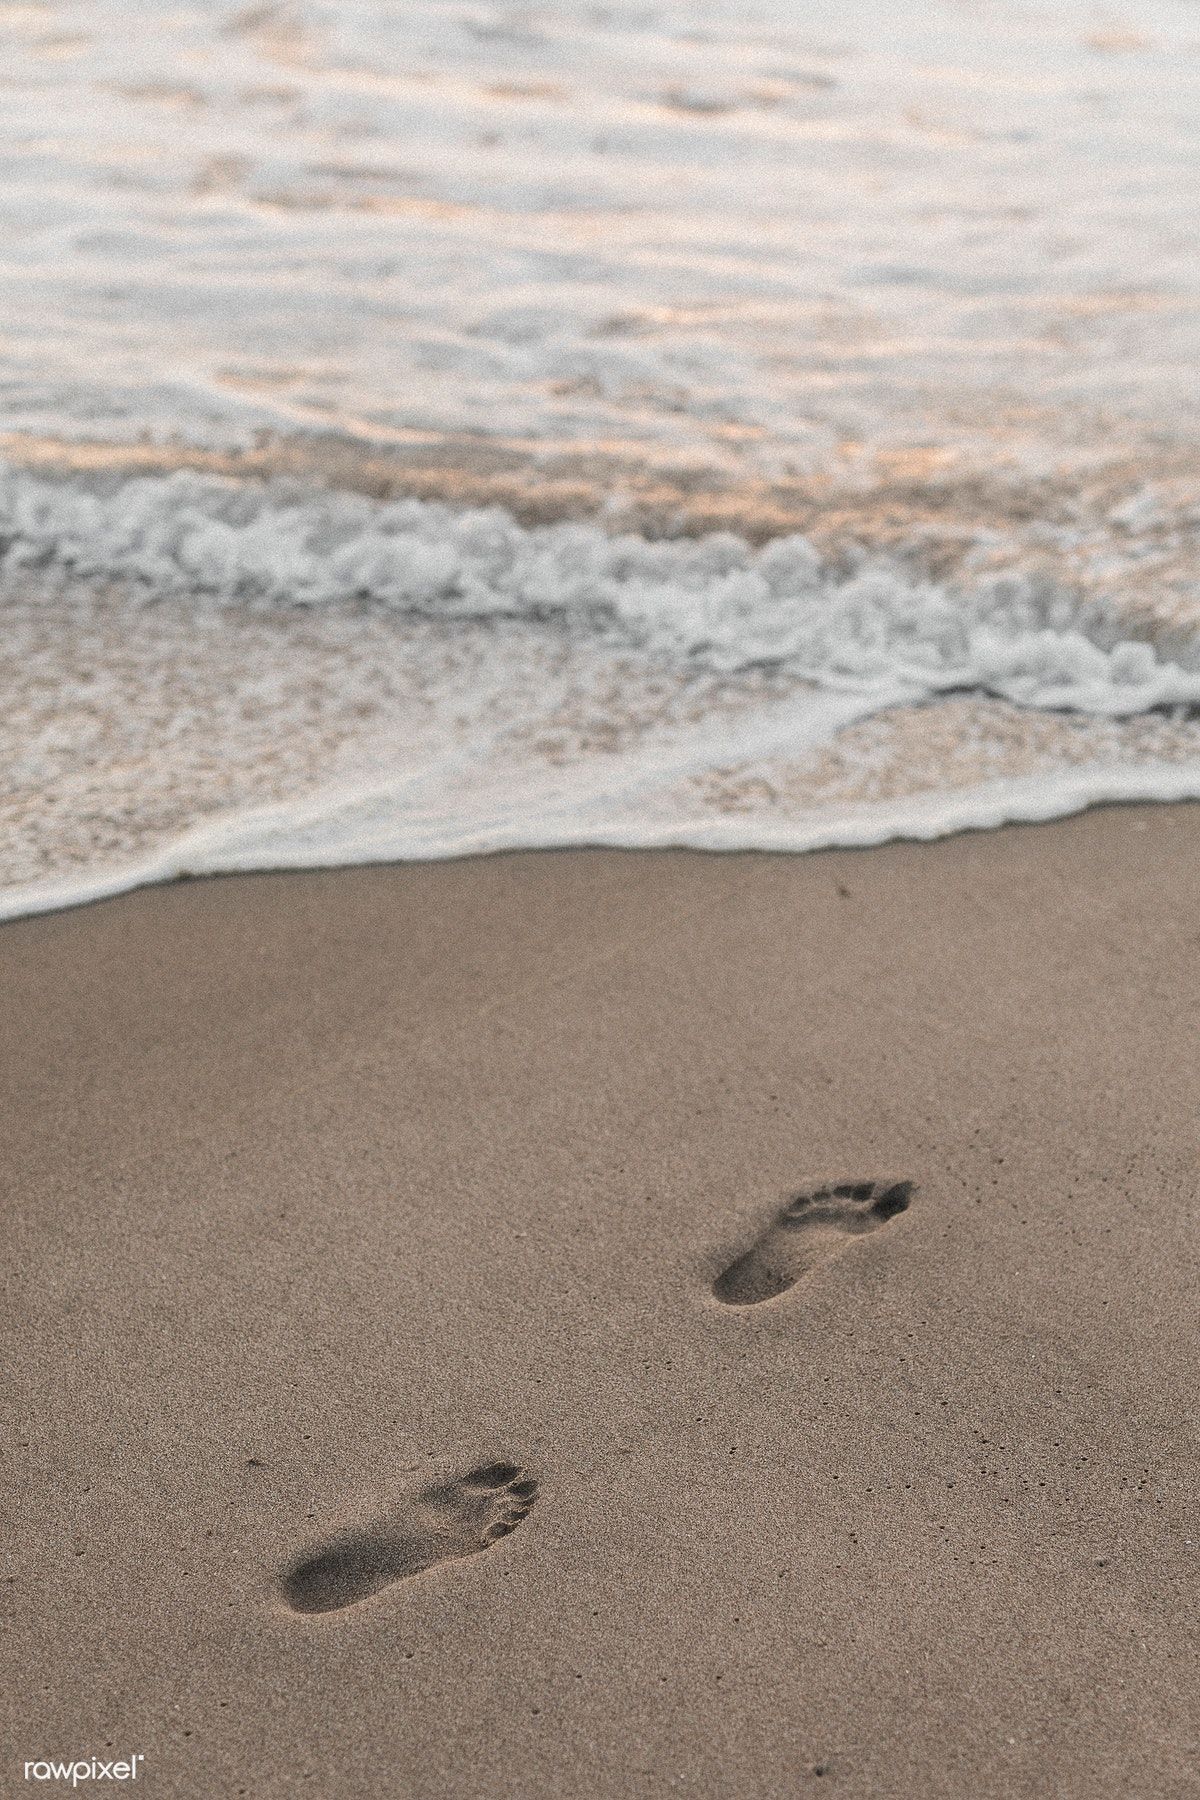 Download premium image of Footstep by the seashore in the summer 1080018. Footprint image, Sand footprint, Minimal photography